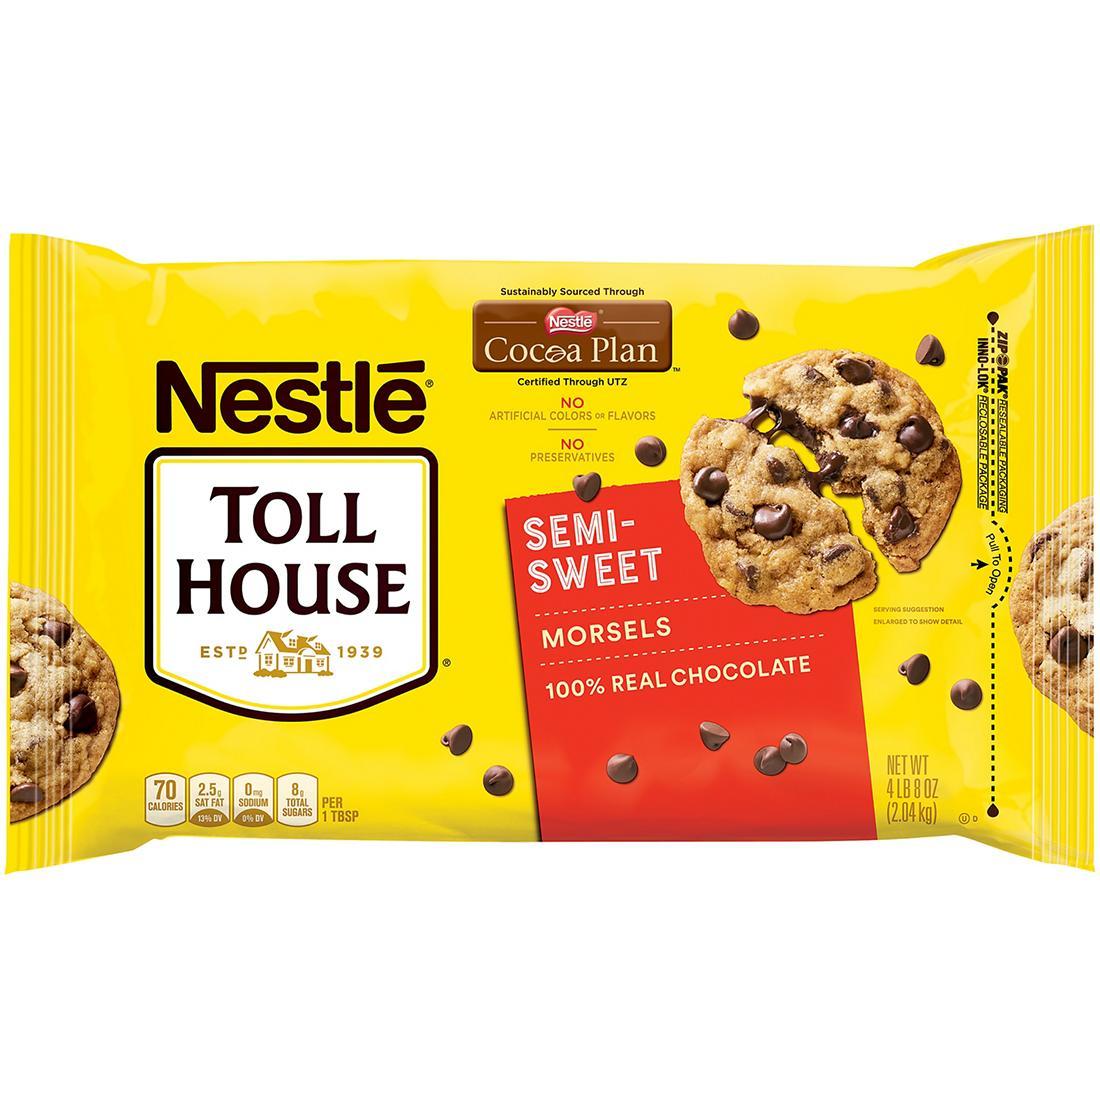 Nestlé Toll House Baking Morsels Toll House Semi-Sweet 72 Ounce 